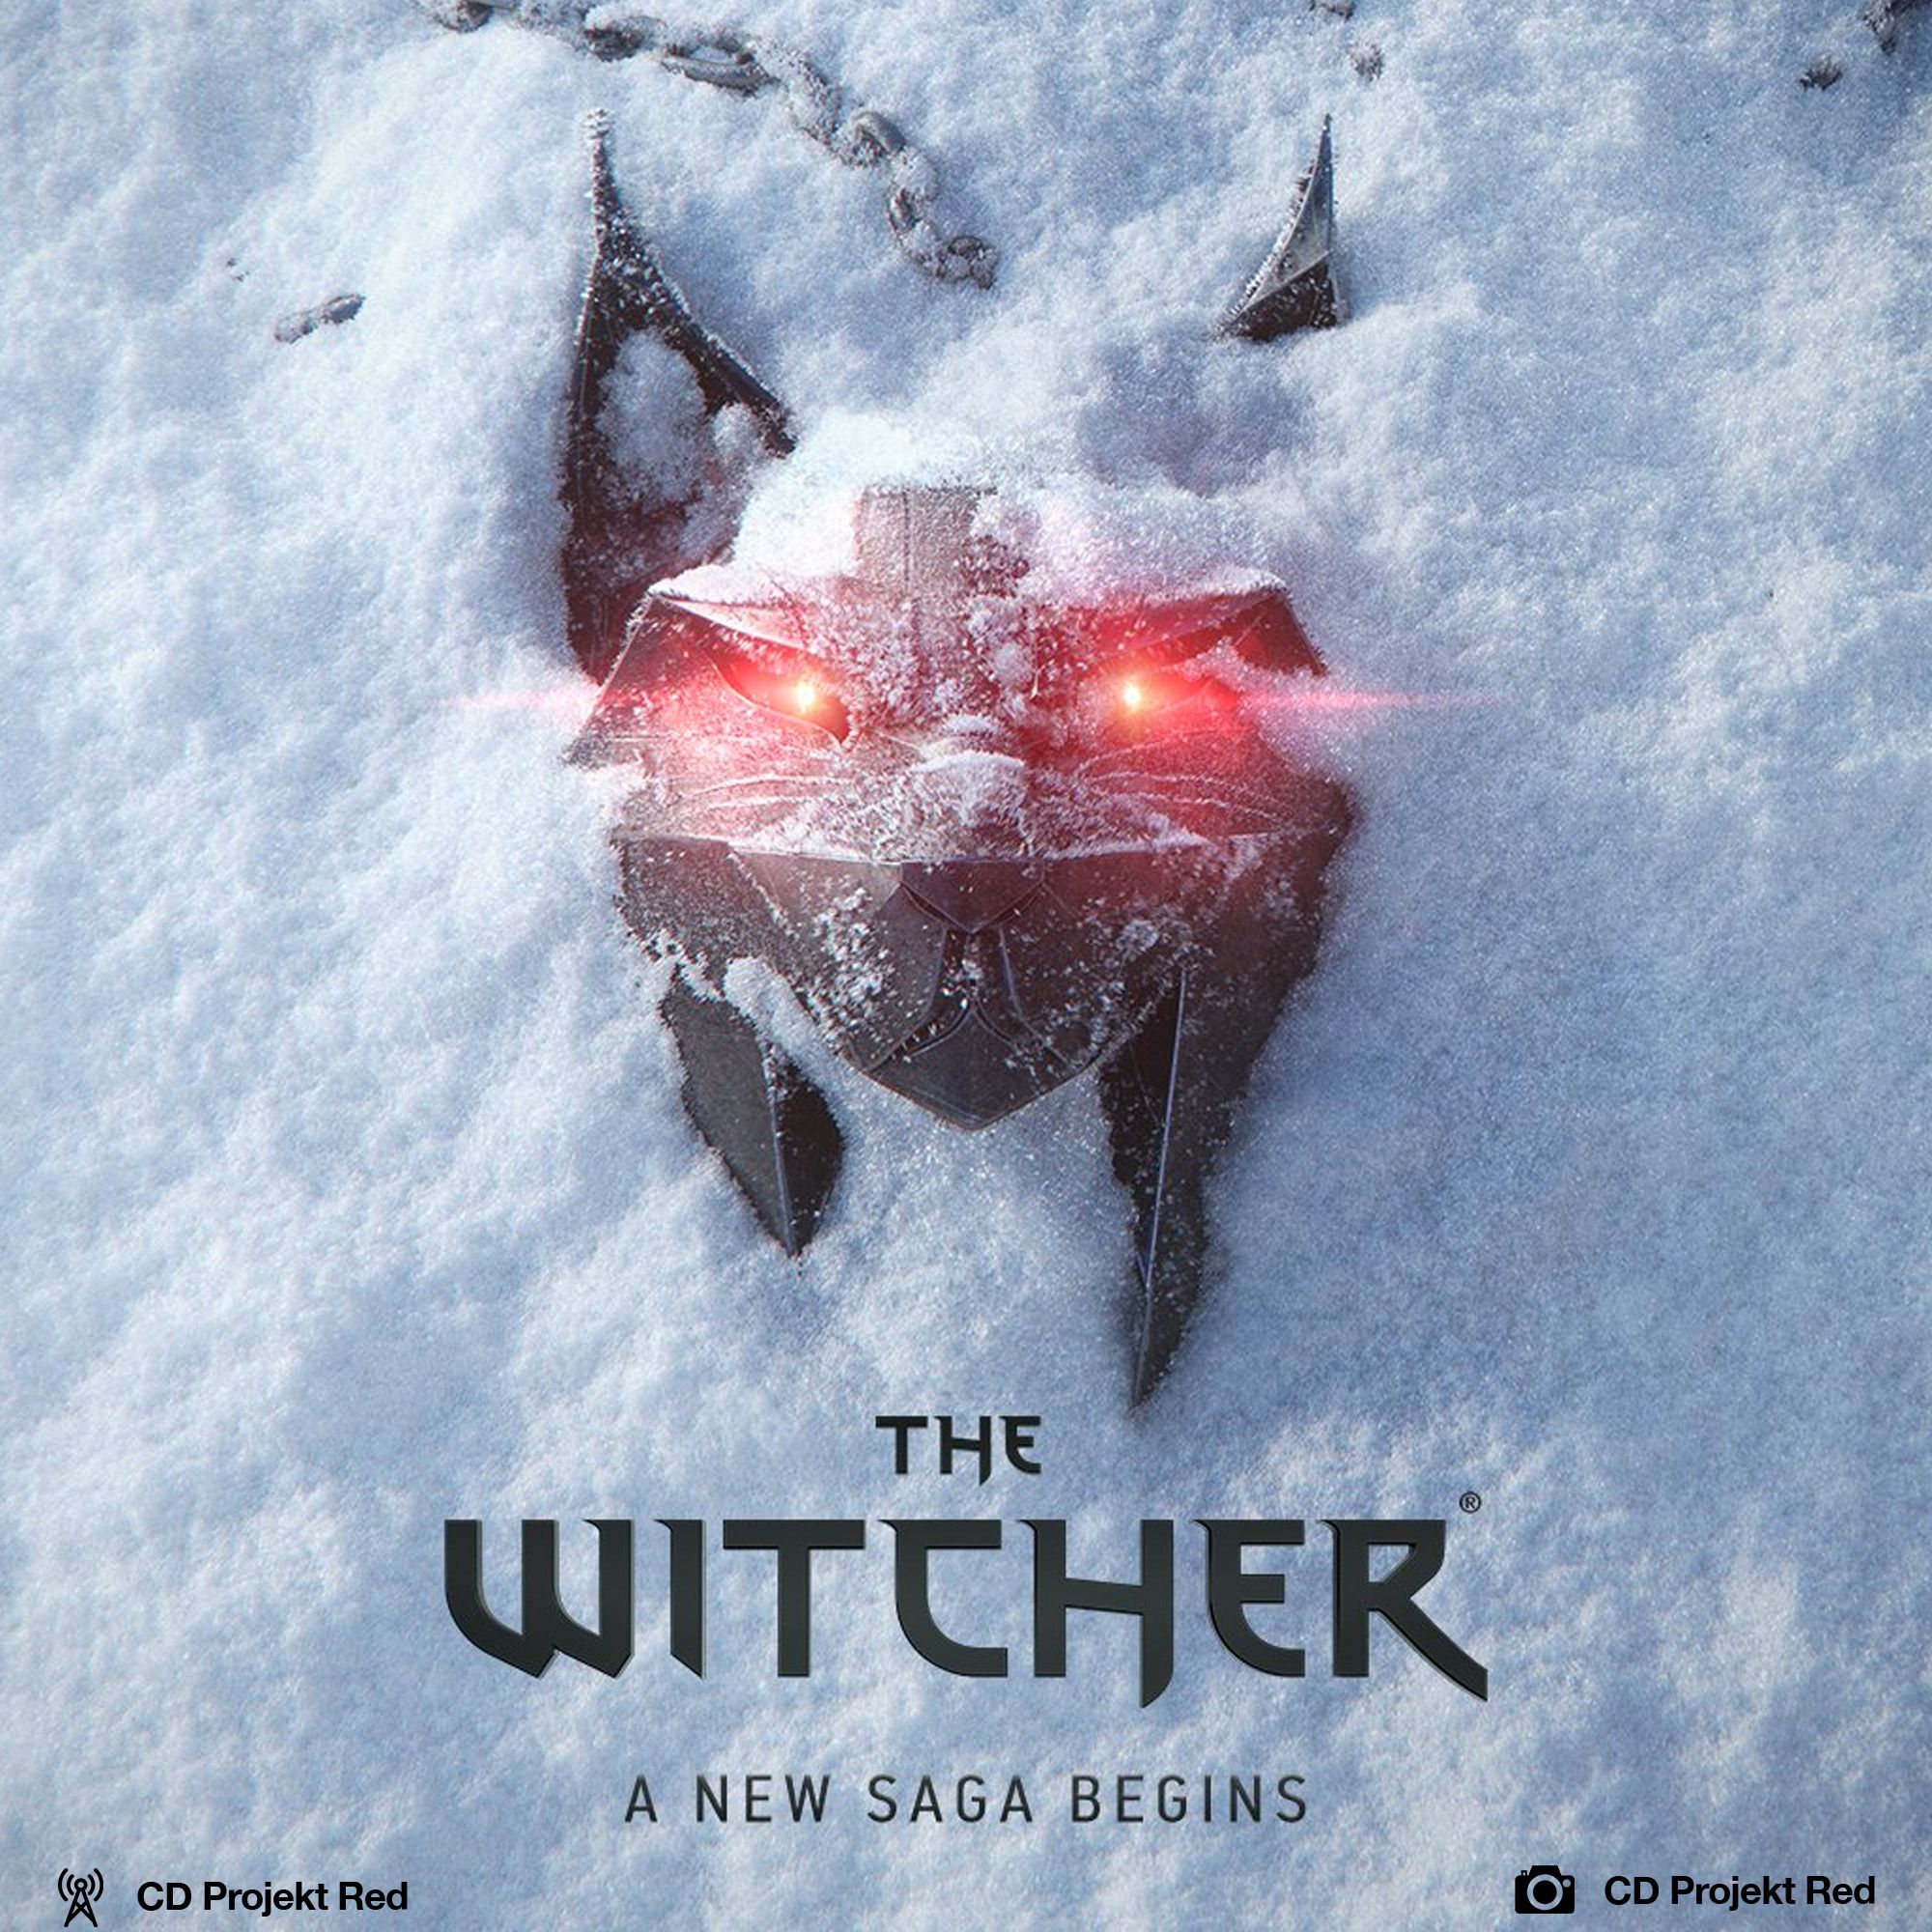 The new Witcher game announced